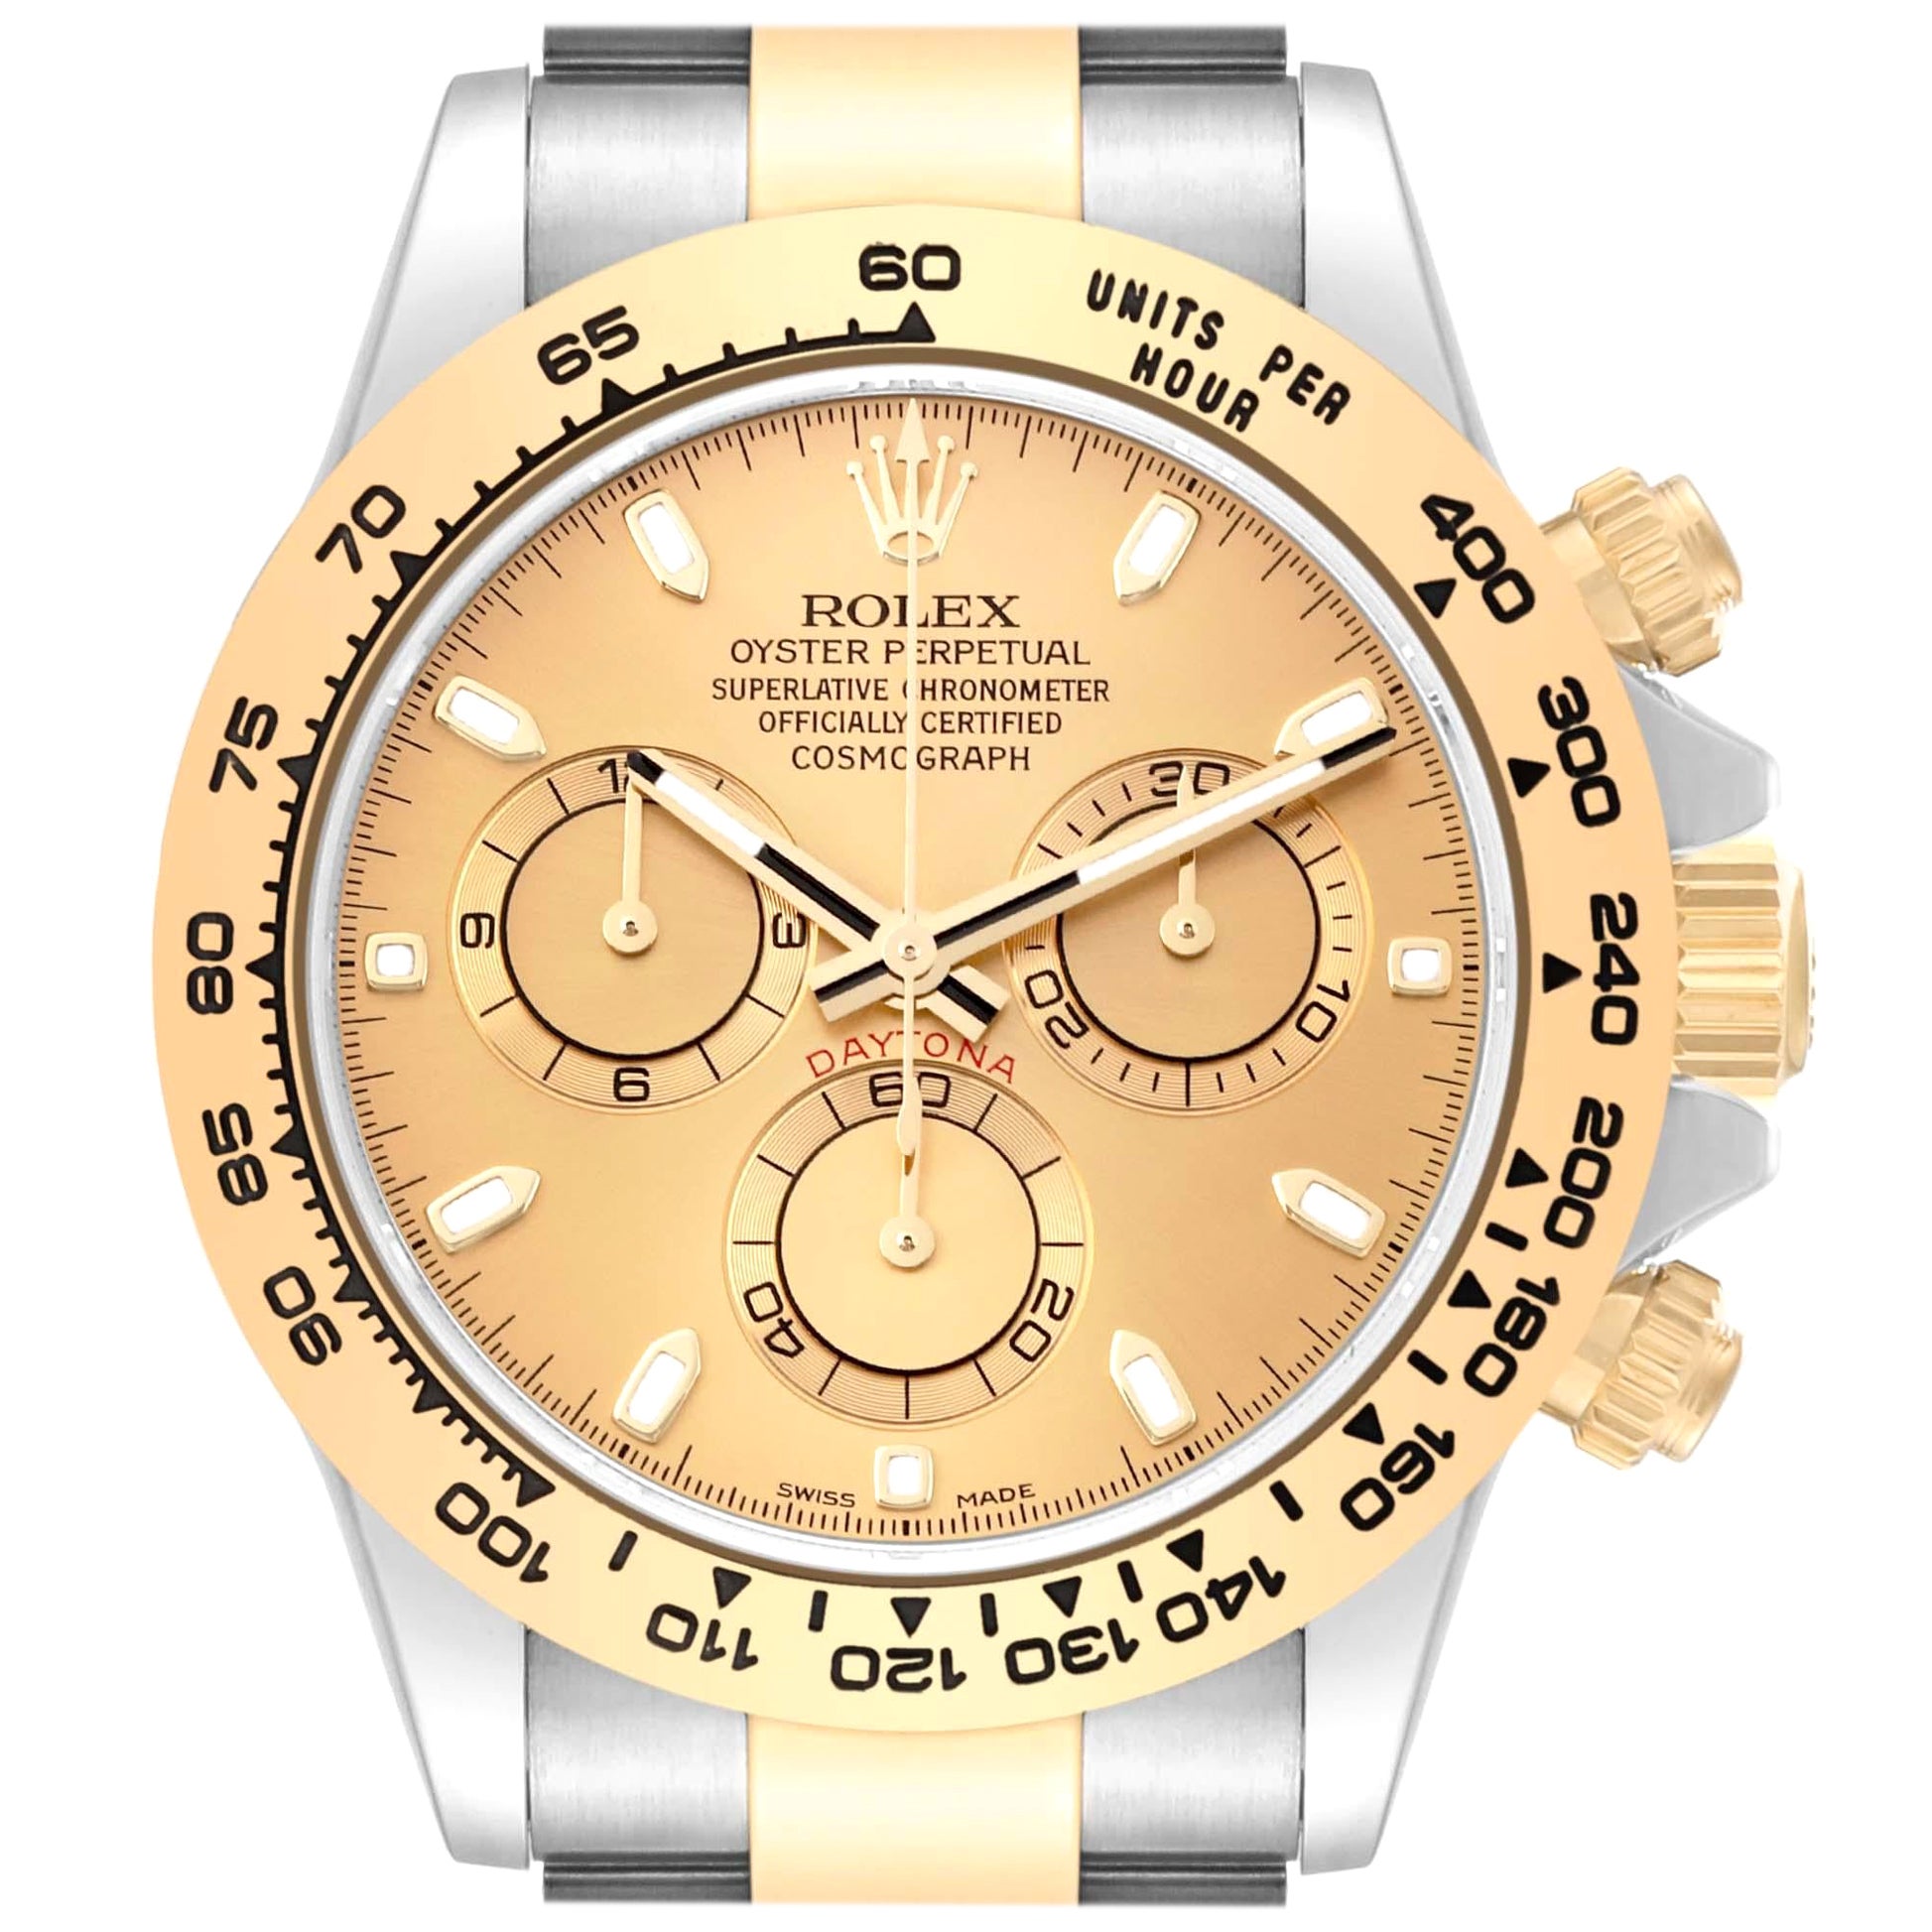 Rolex Cosmograph Daytona Champagne Dial Steel Yellow Gold Mens Watch 116503 For Sale